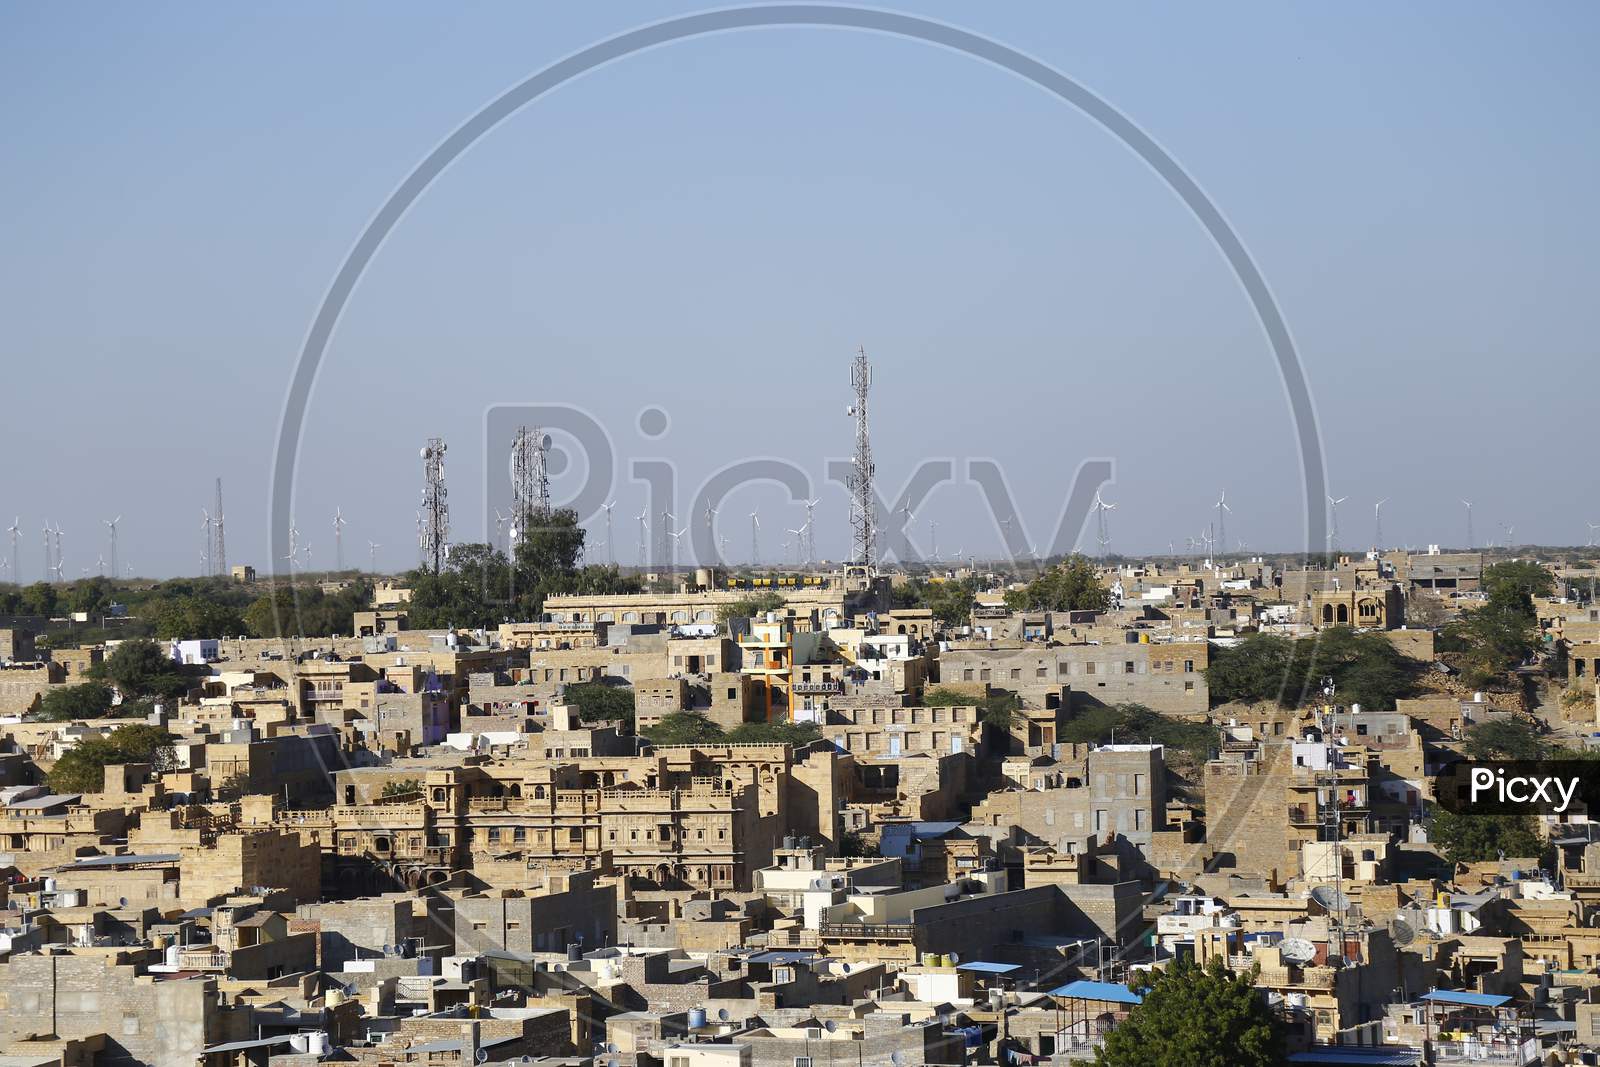 Landscape Of Jaisalmer City with Houses In Rajasthan